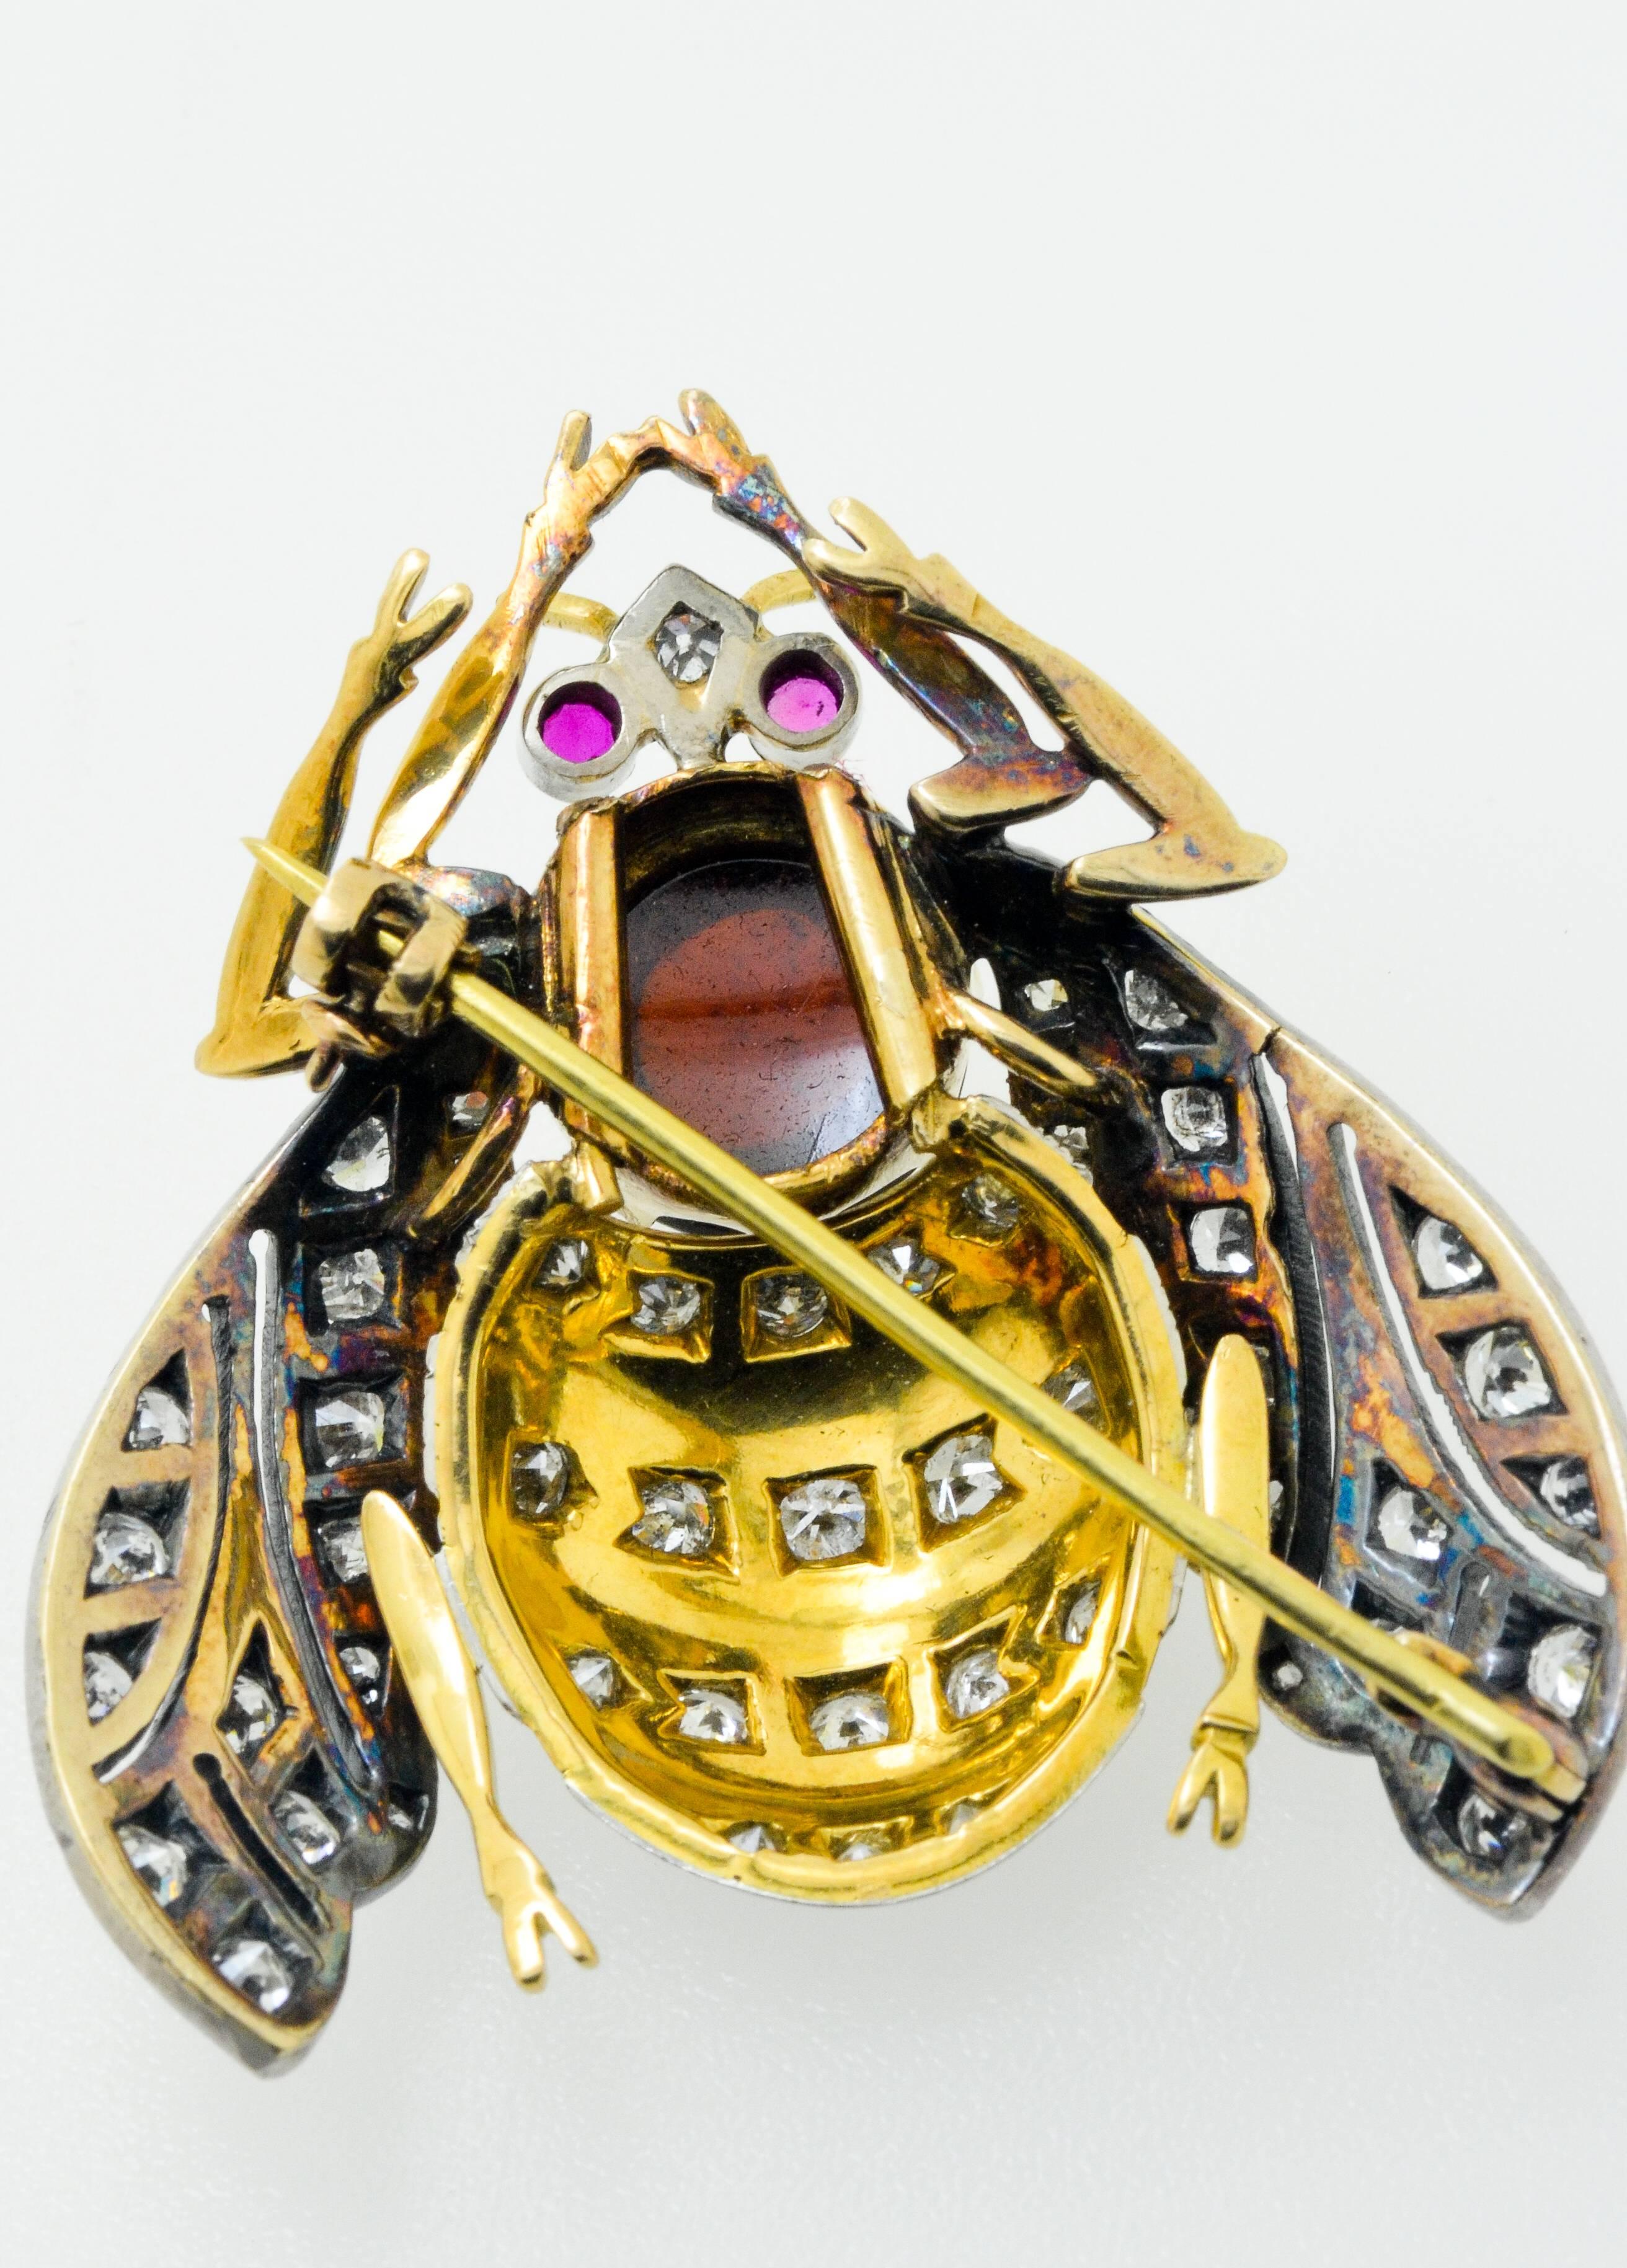 Beauitful insect brooch set in 18 karat white and yellow gold consisting of 3 carats of clean white brilliant cut diamonds, a black enamel and cabochon gemstone centre stone and ruby eyes.